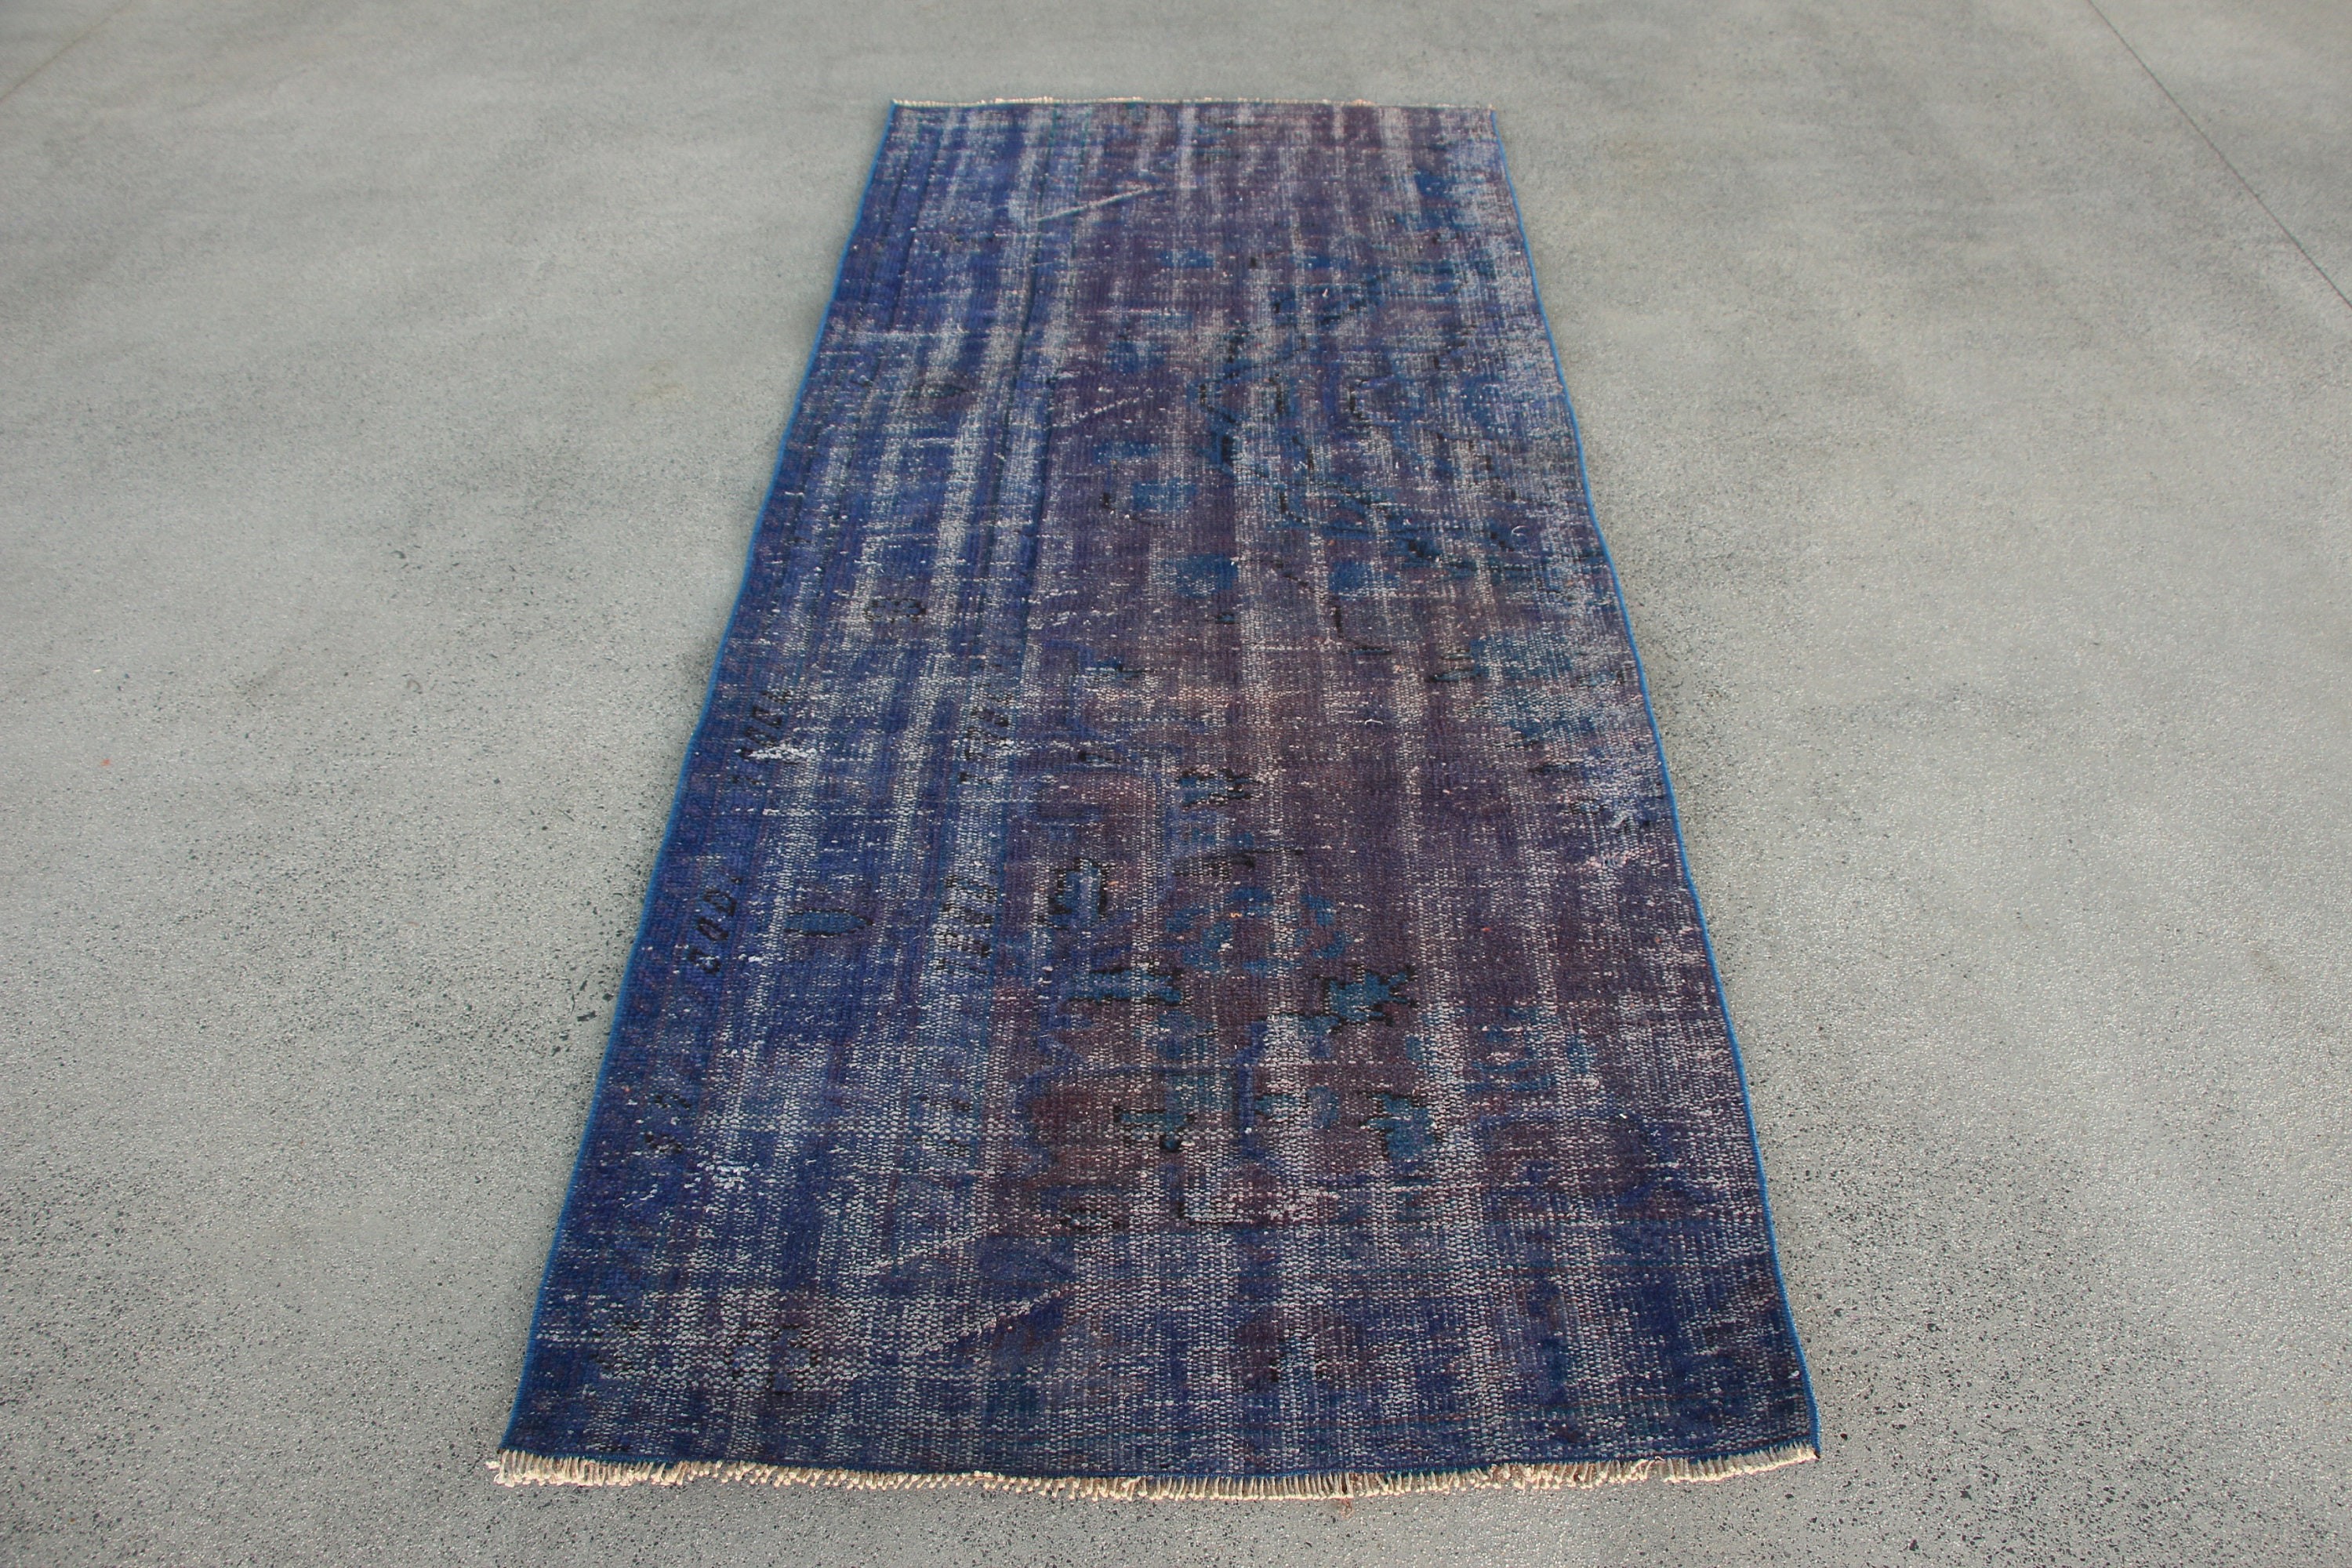 Turkish Rugs, Entry Rug, 3.1x7.4 ft Accent Rugs, Oushak Rug, Vintage Rug, Rugs for Nursery, Blue Oushak Rugs, Kitchen Rug, Antique Rug